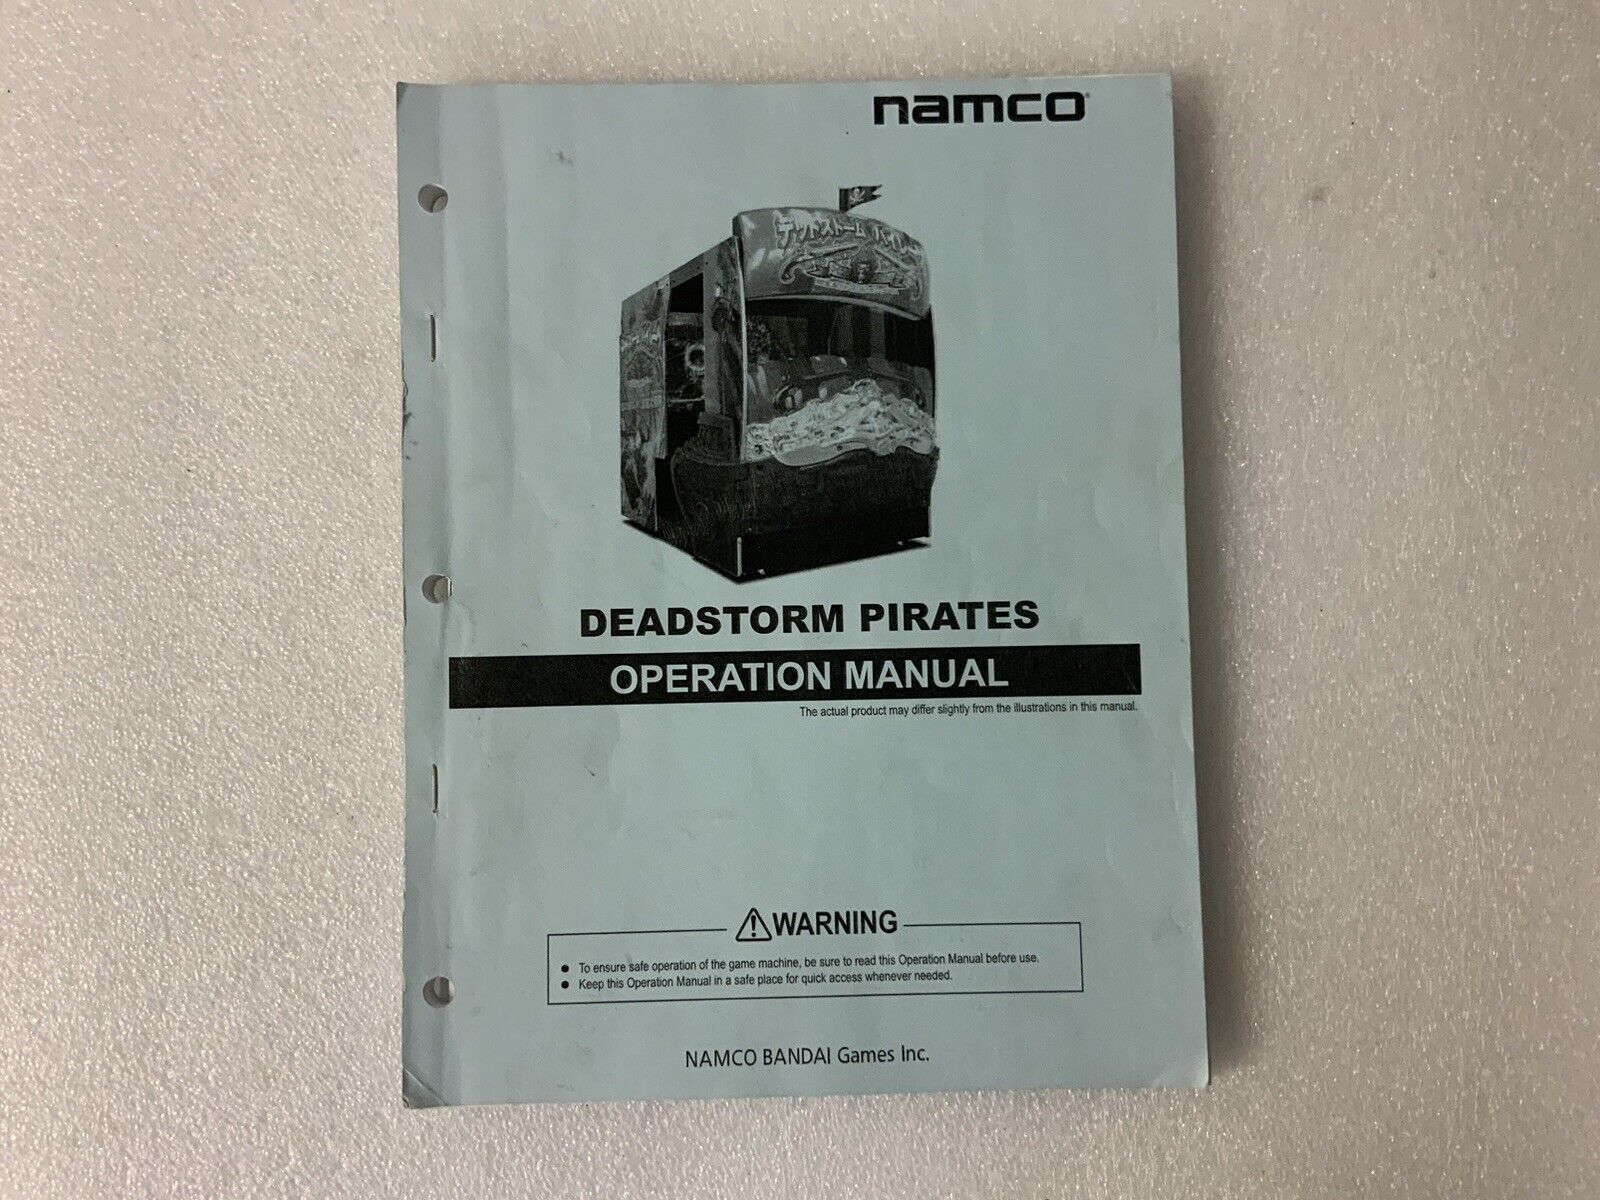 Namco Deadstorm Pirates Operation Manual